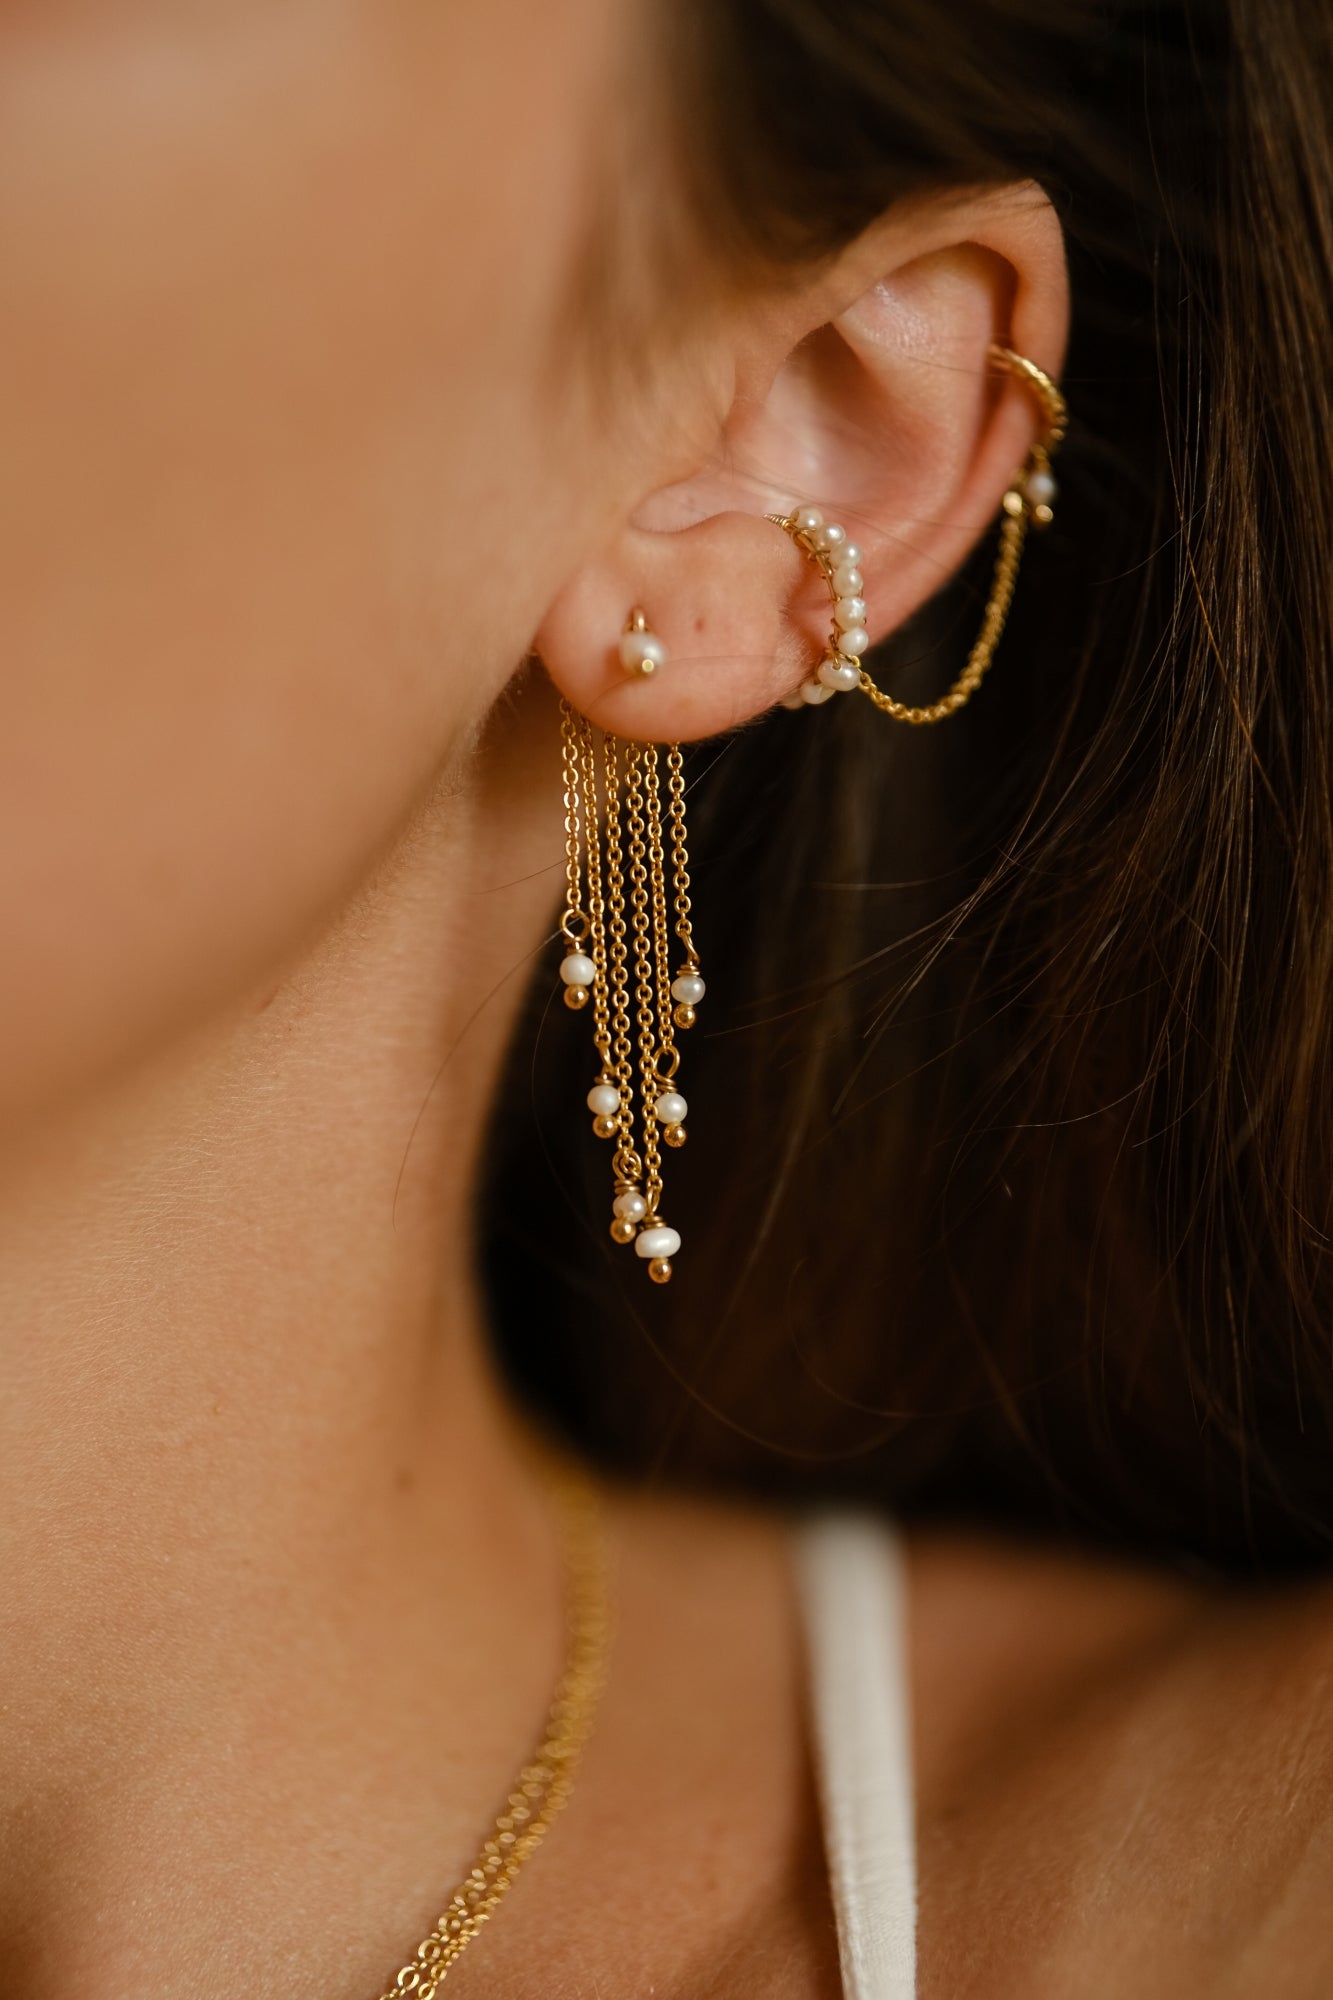 Double ear ring "Passion"